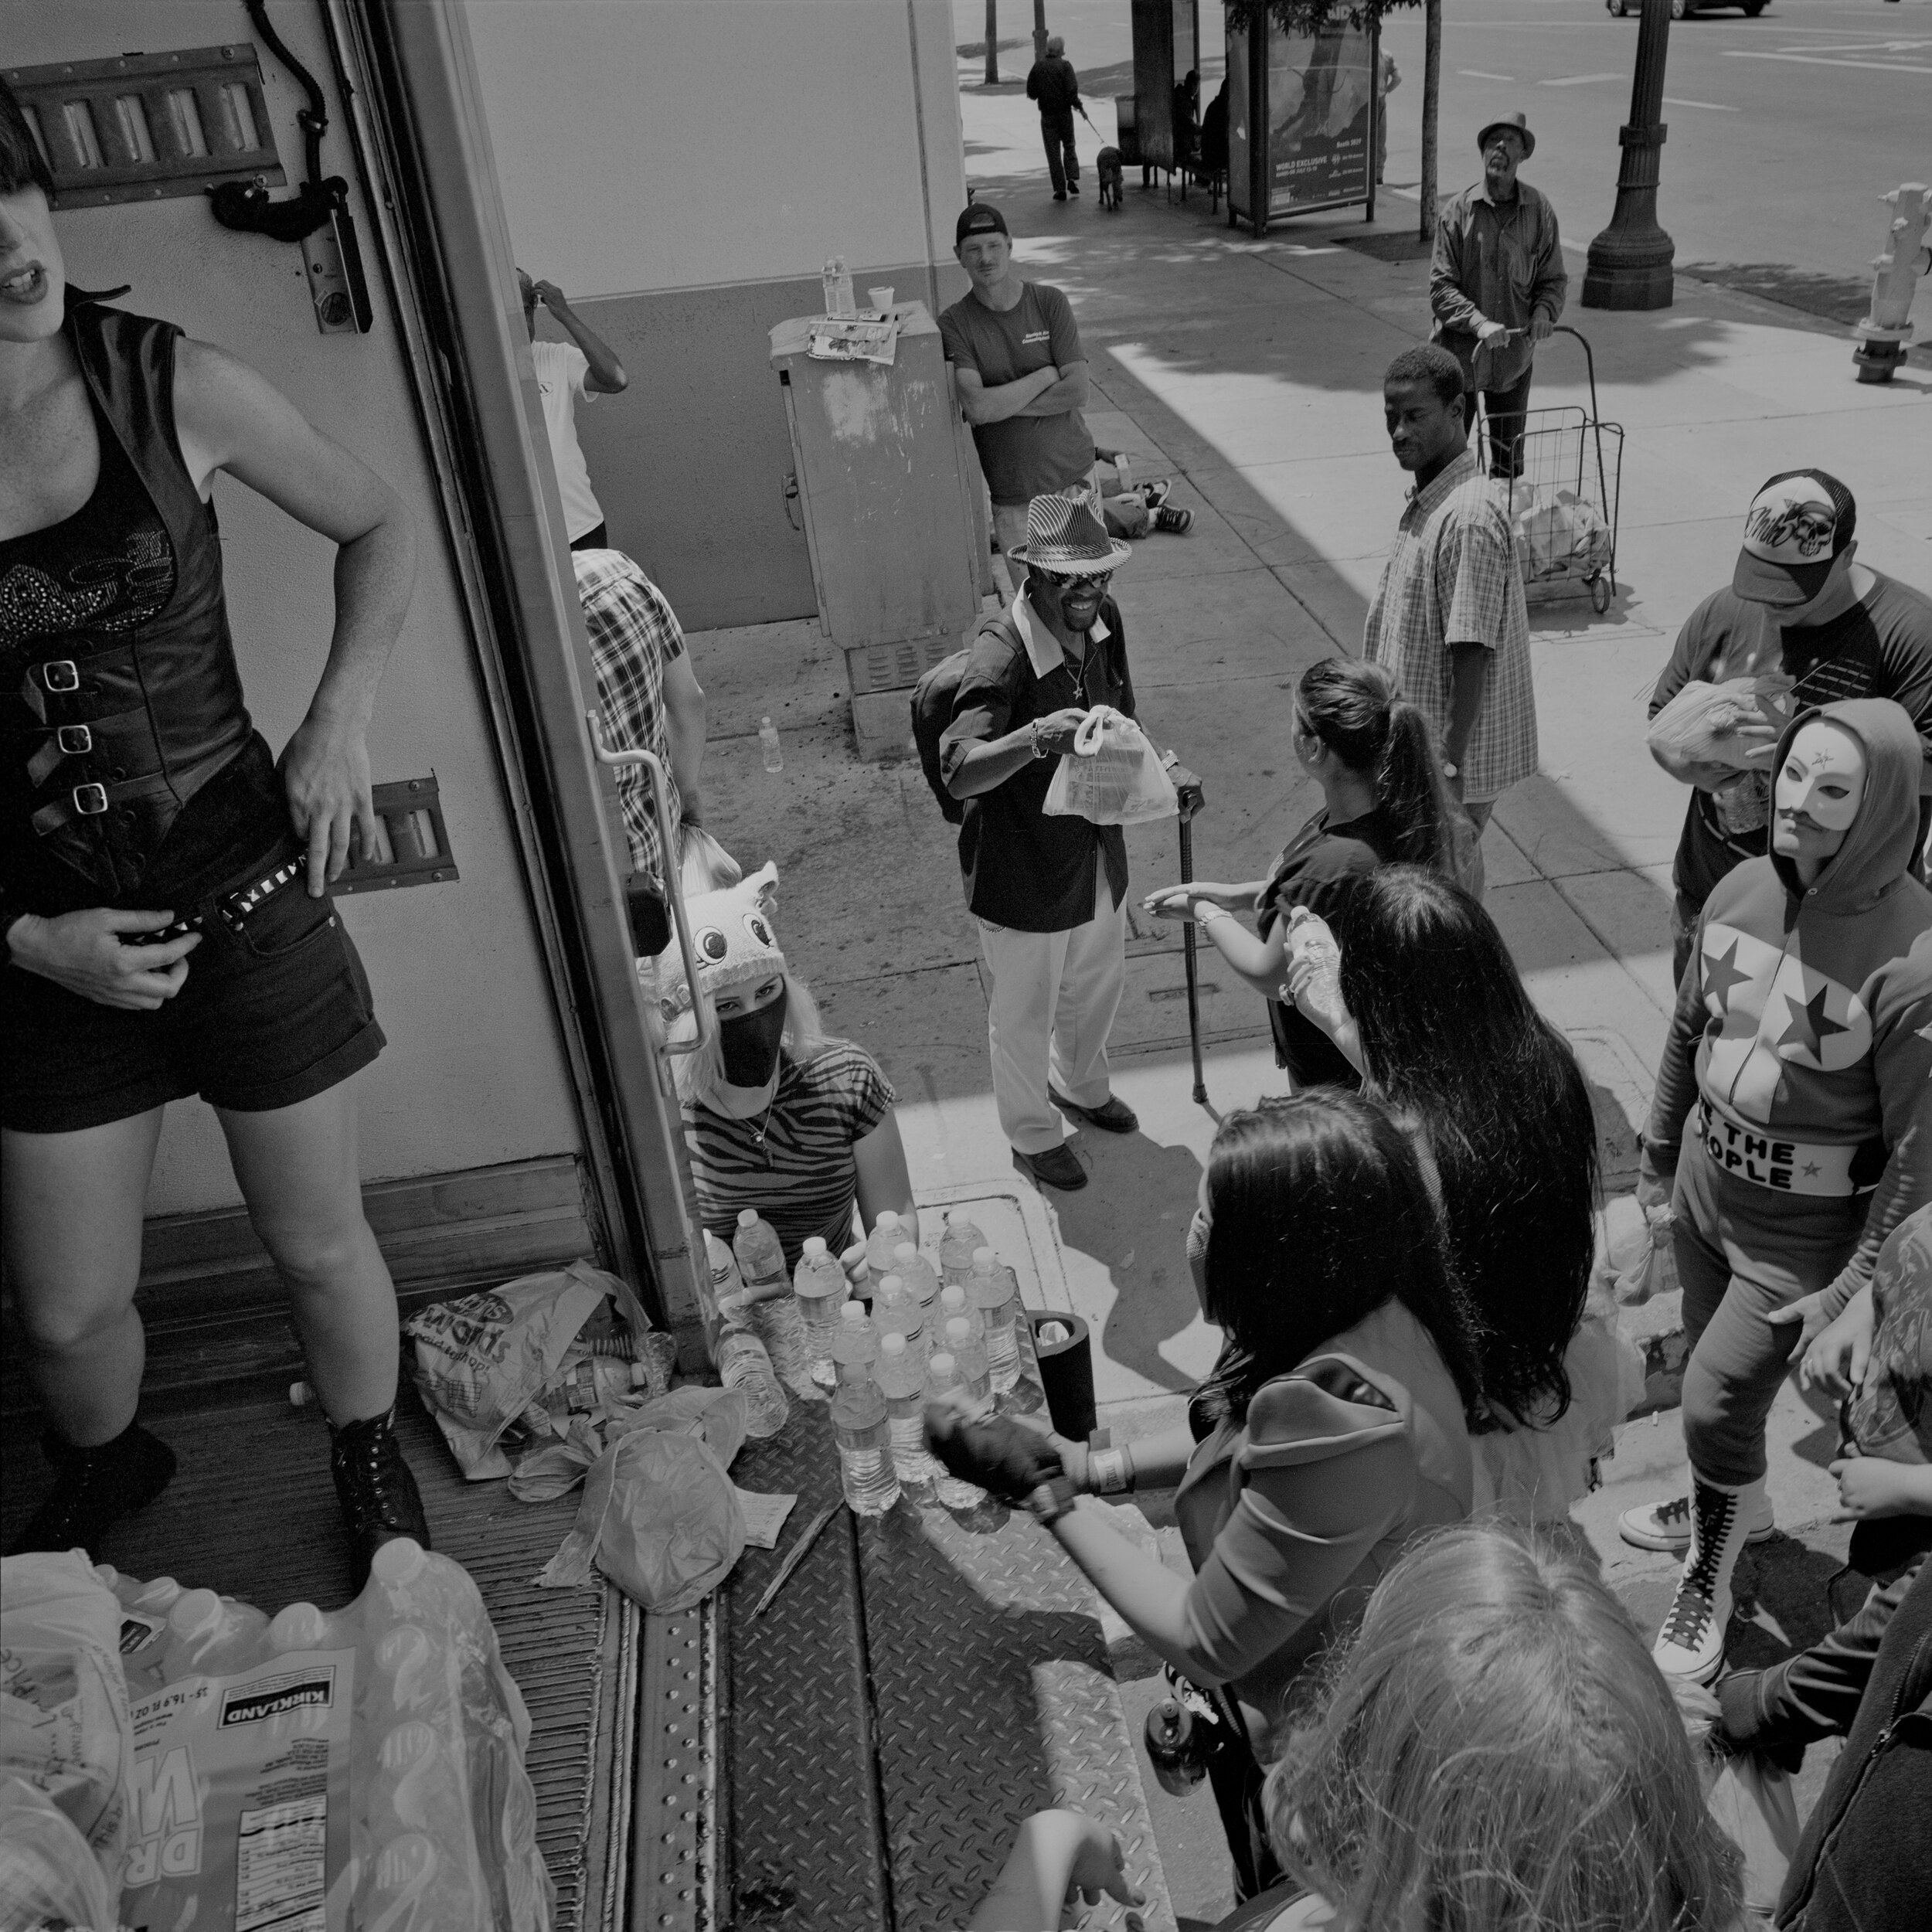  Superheroes hand out food to unhoused people during HOPE 2012 in San Diego, CA on July 14, 2012. 